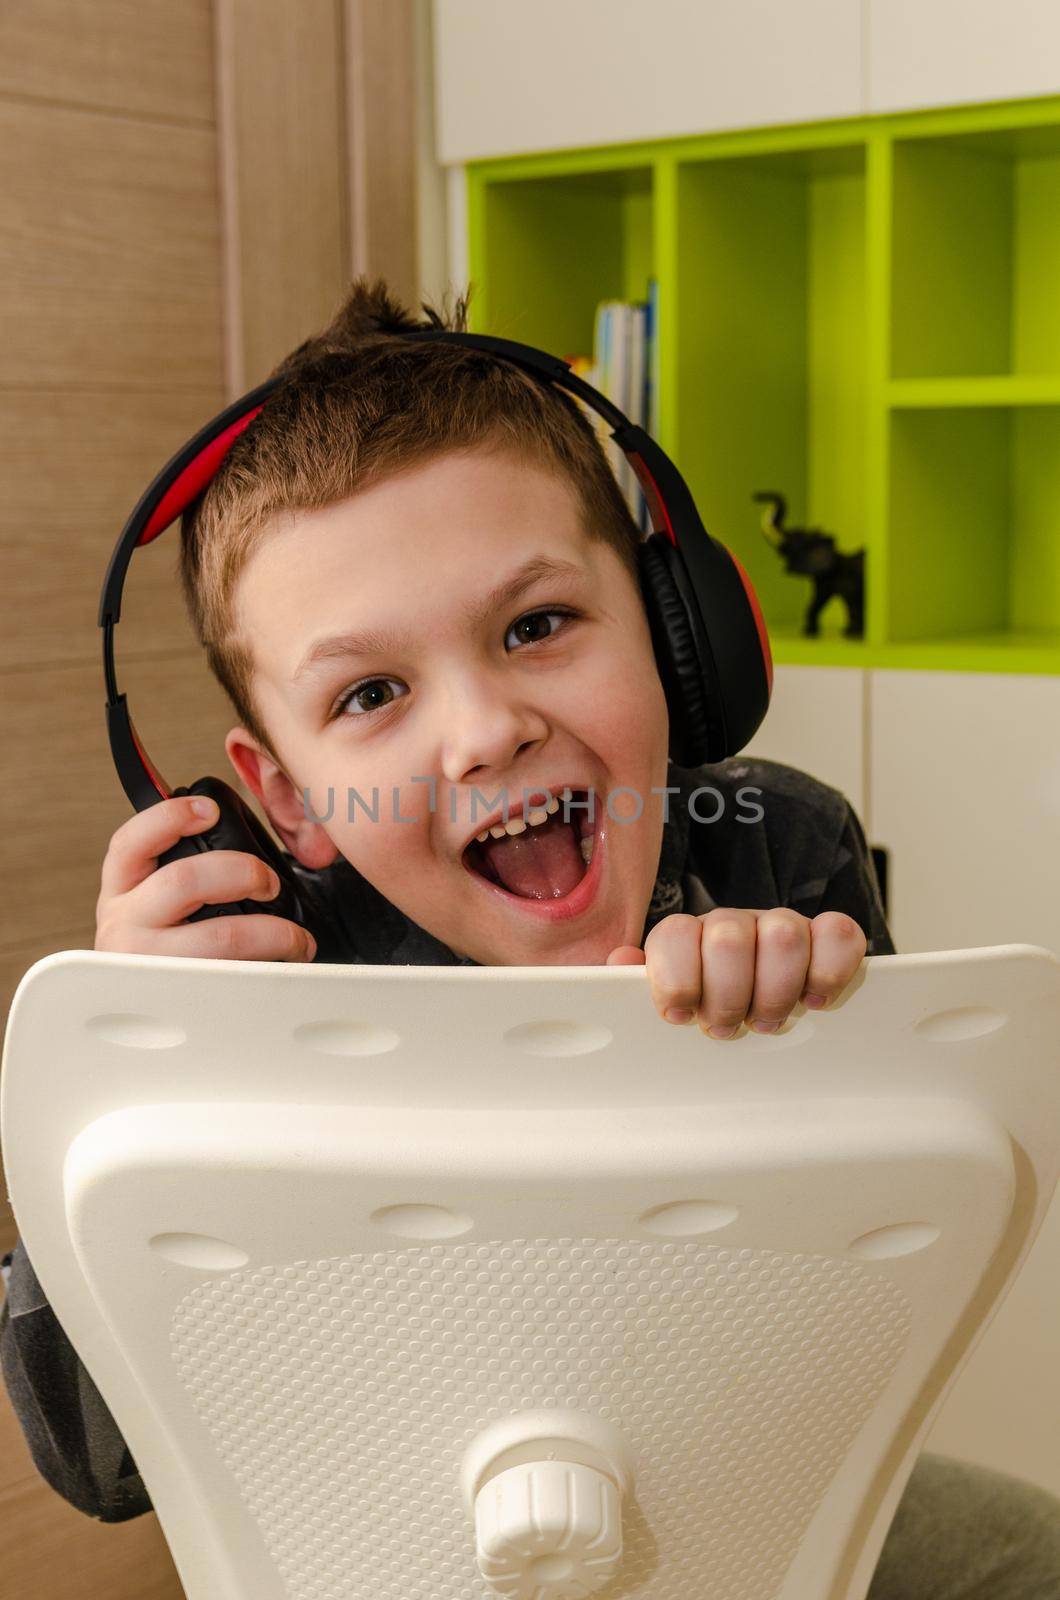 A little boy listens to music in wireless headphones at home, close-up.